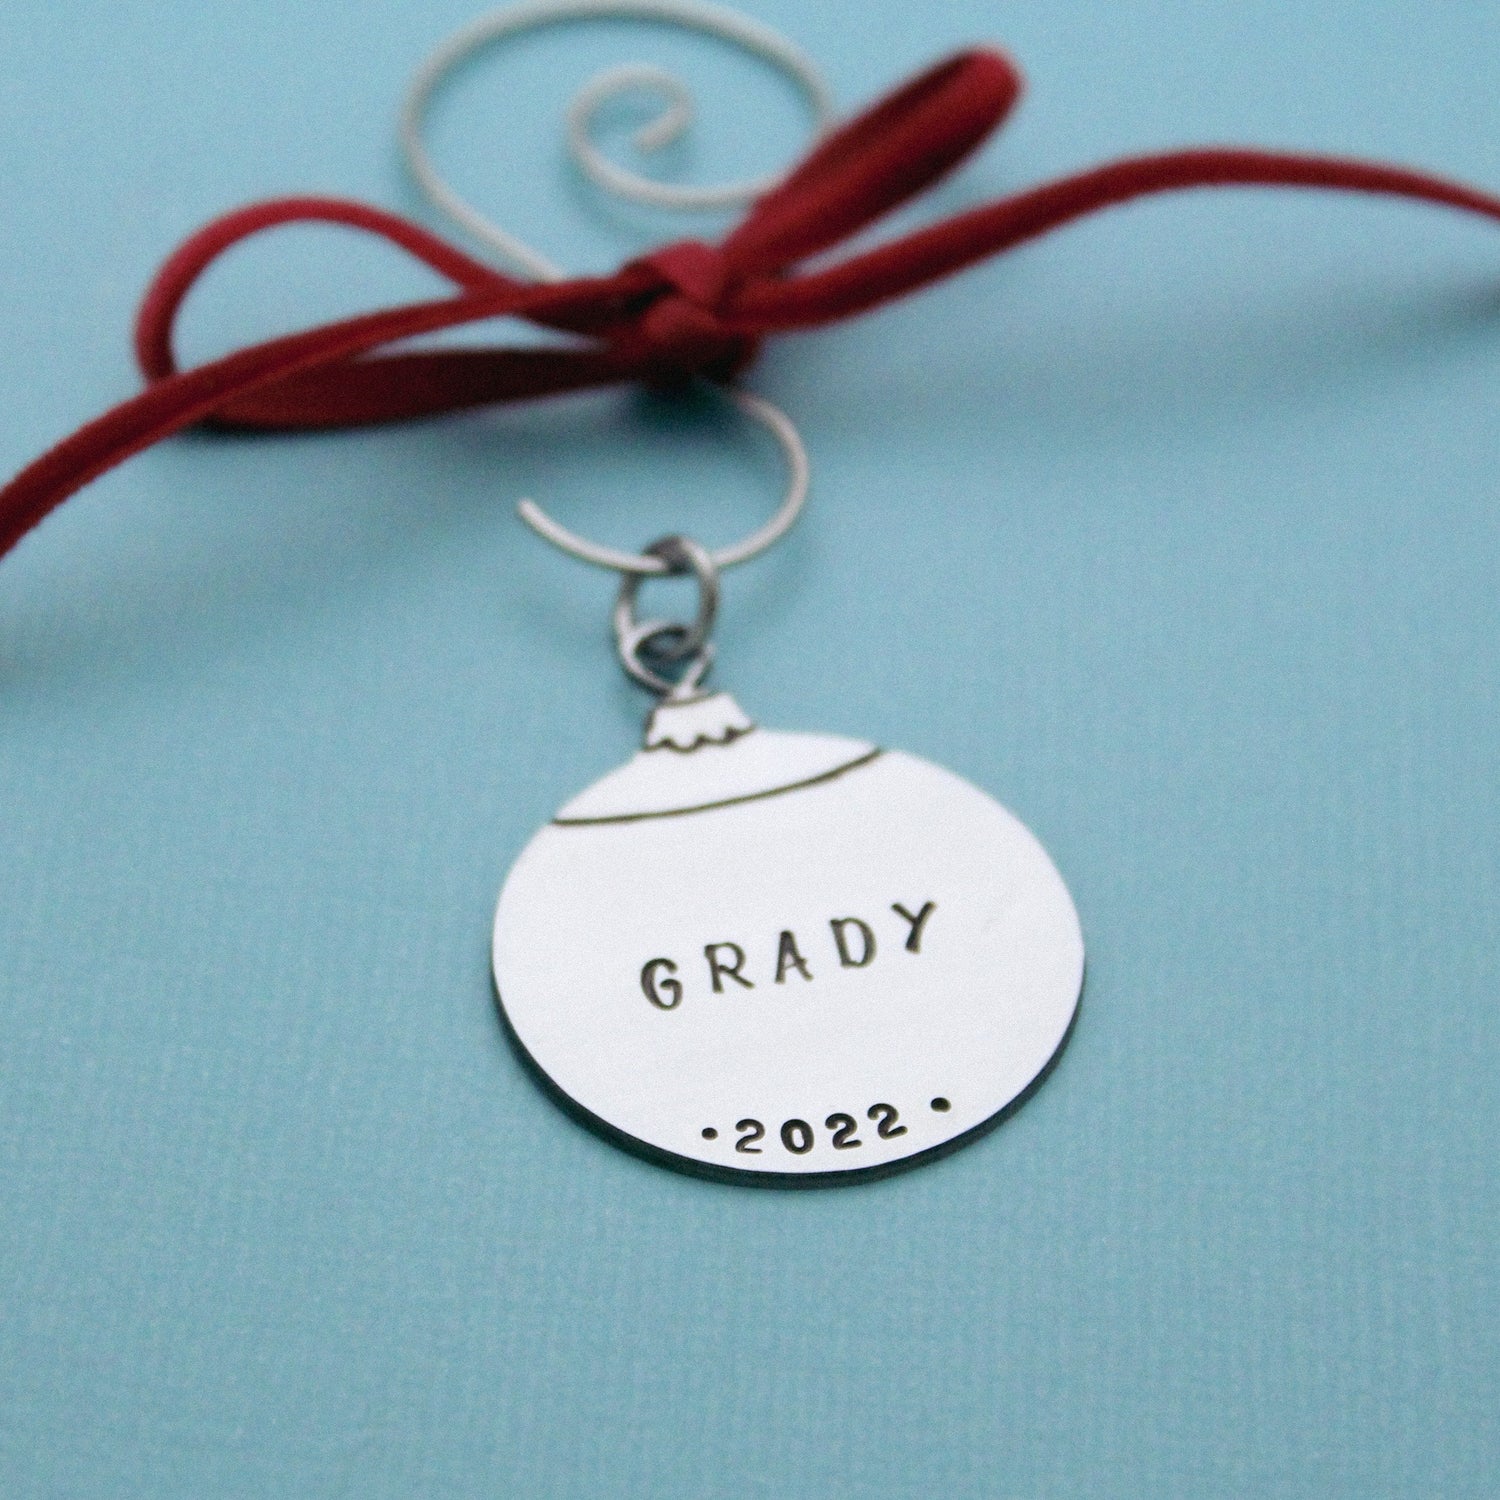 Personalized Custom Christmas Ornament Hand Stamped in Aluminum